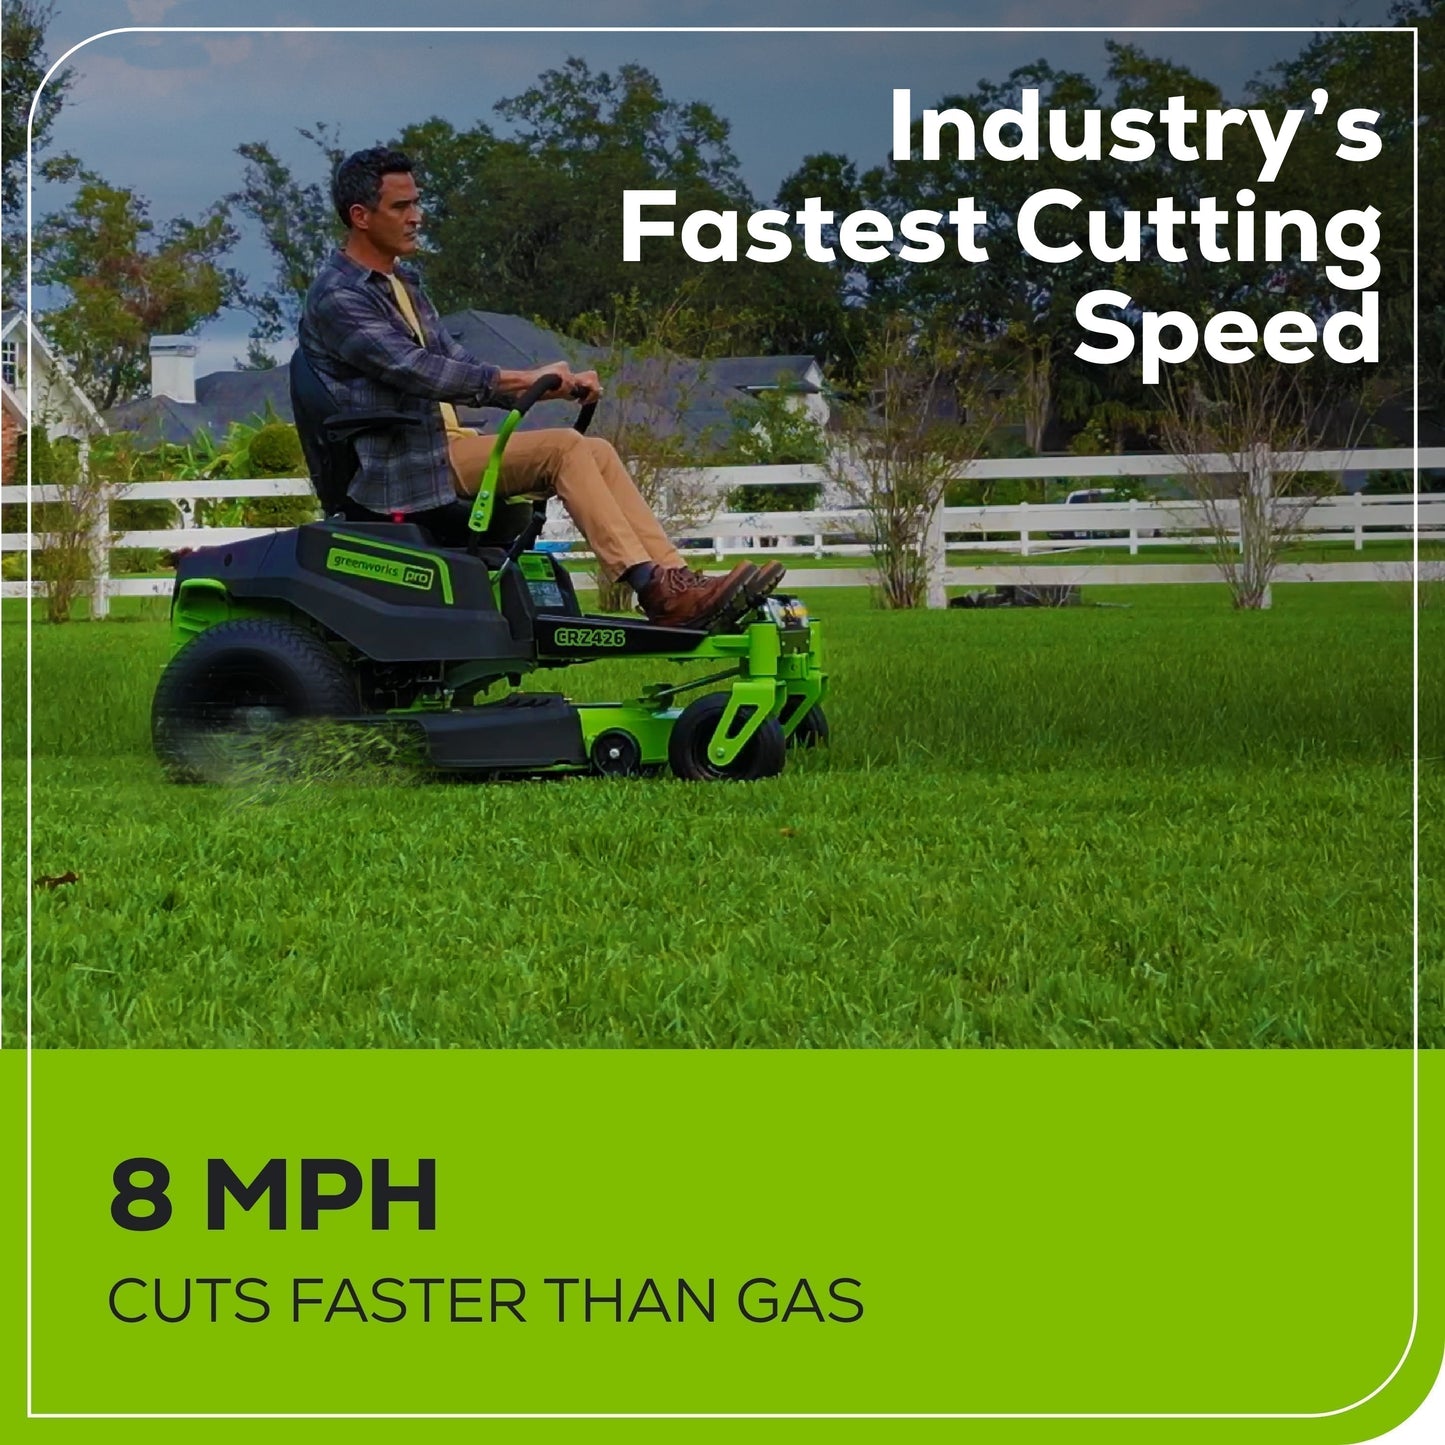 60V 42” Electric CrossoverZ Zero Turn Mower with (4) 8 Ah Batteries and (2) Dual Port Turbo Chargers - ZEROTURNN